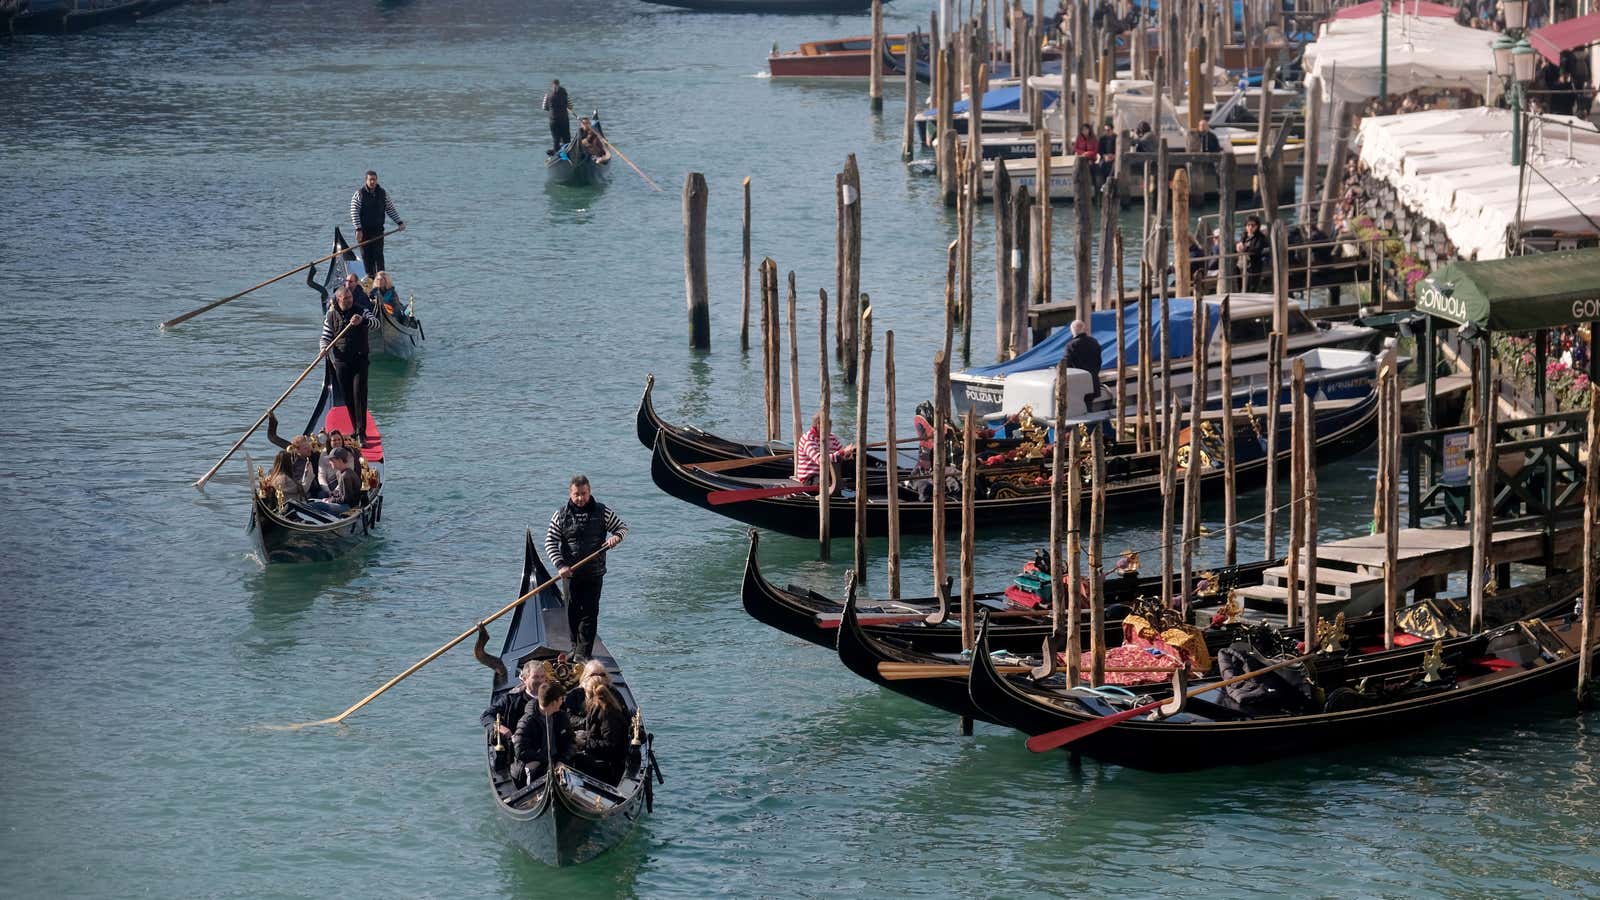 Venice’s resident population has fallen to its lowest level in centuries.